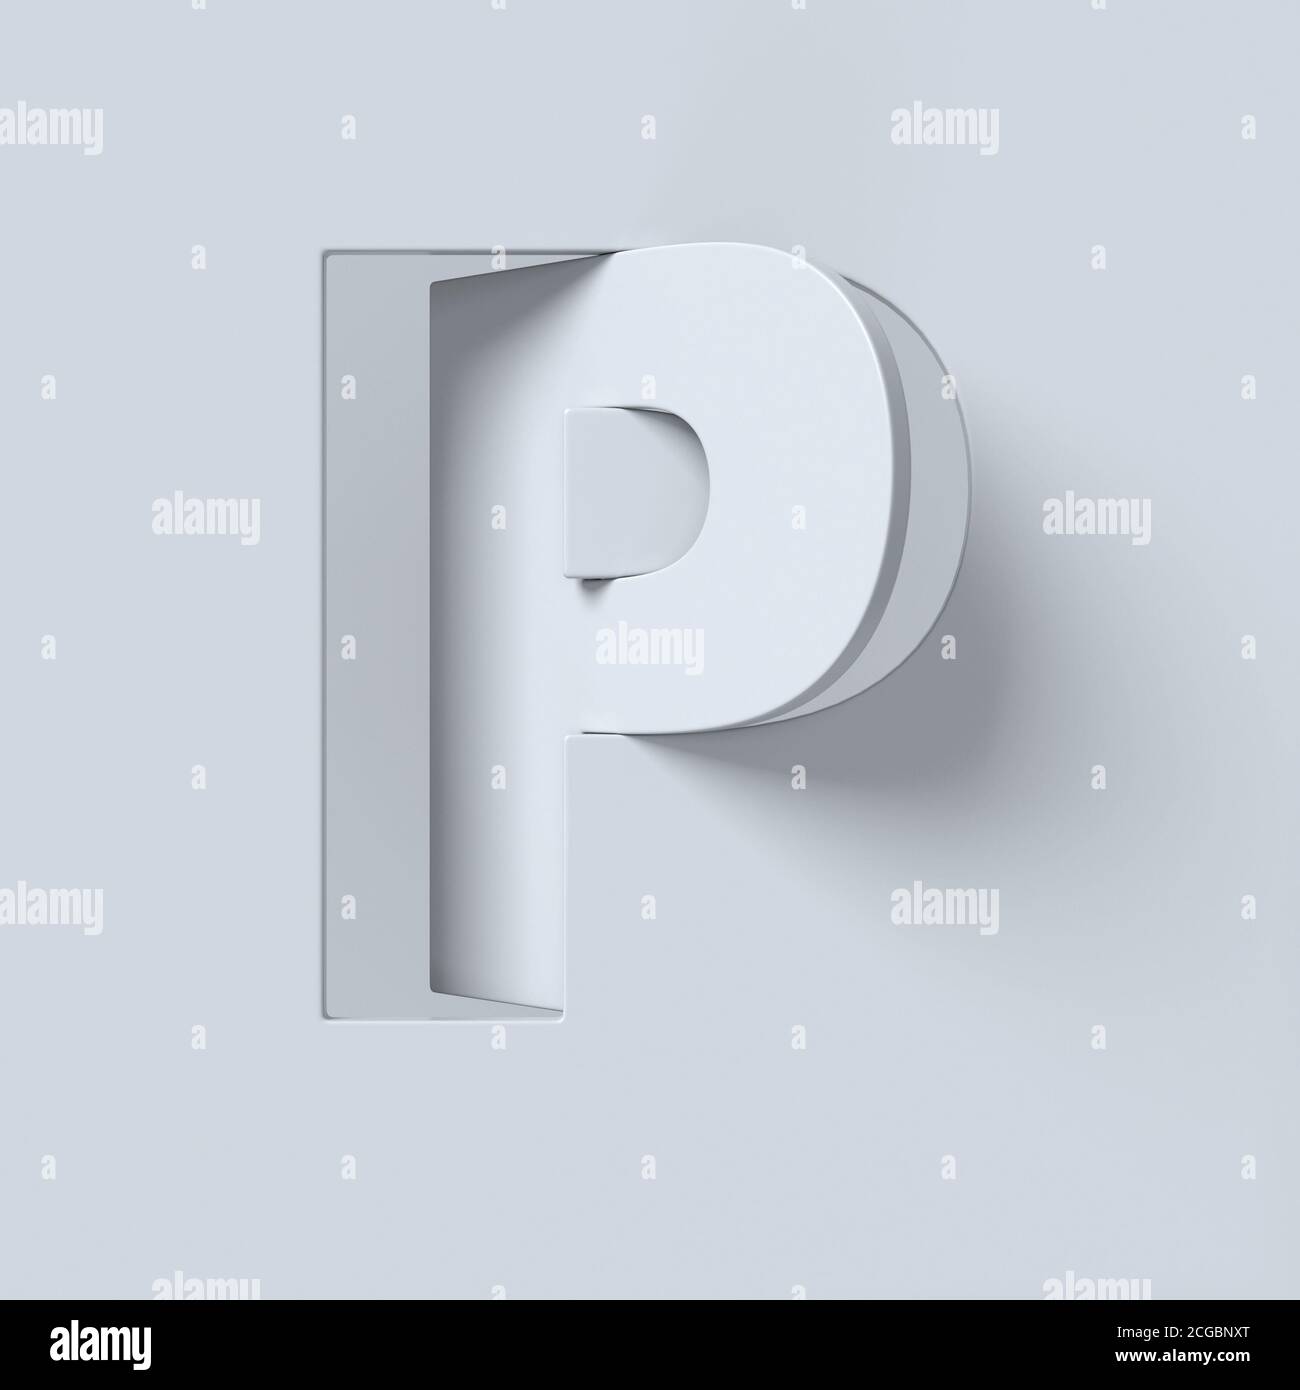 The letter p Cut Out Stock Images & Pictures - Alamy